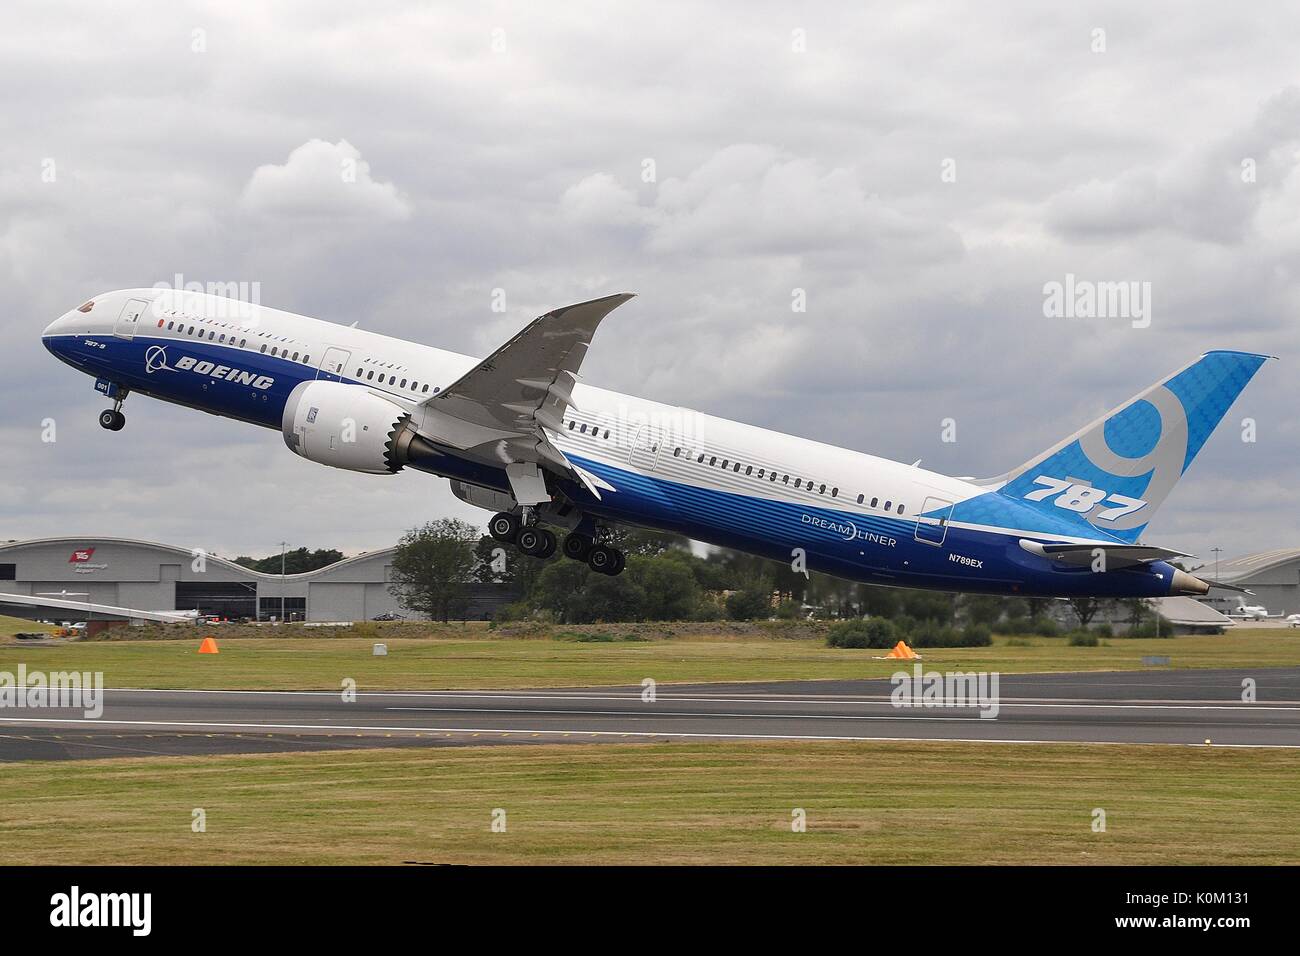 Boeing 787 9 Stock Photos & Boeing 787 9 Stock Images - Alamy1300 x 956